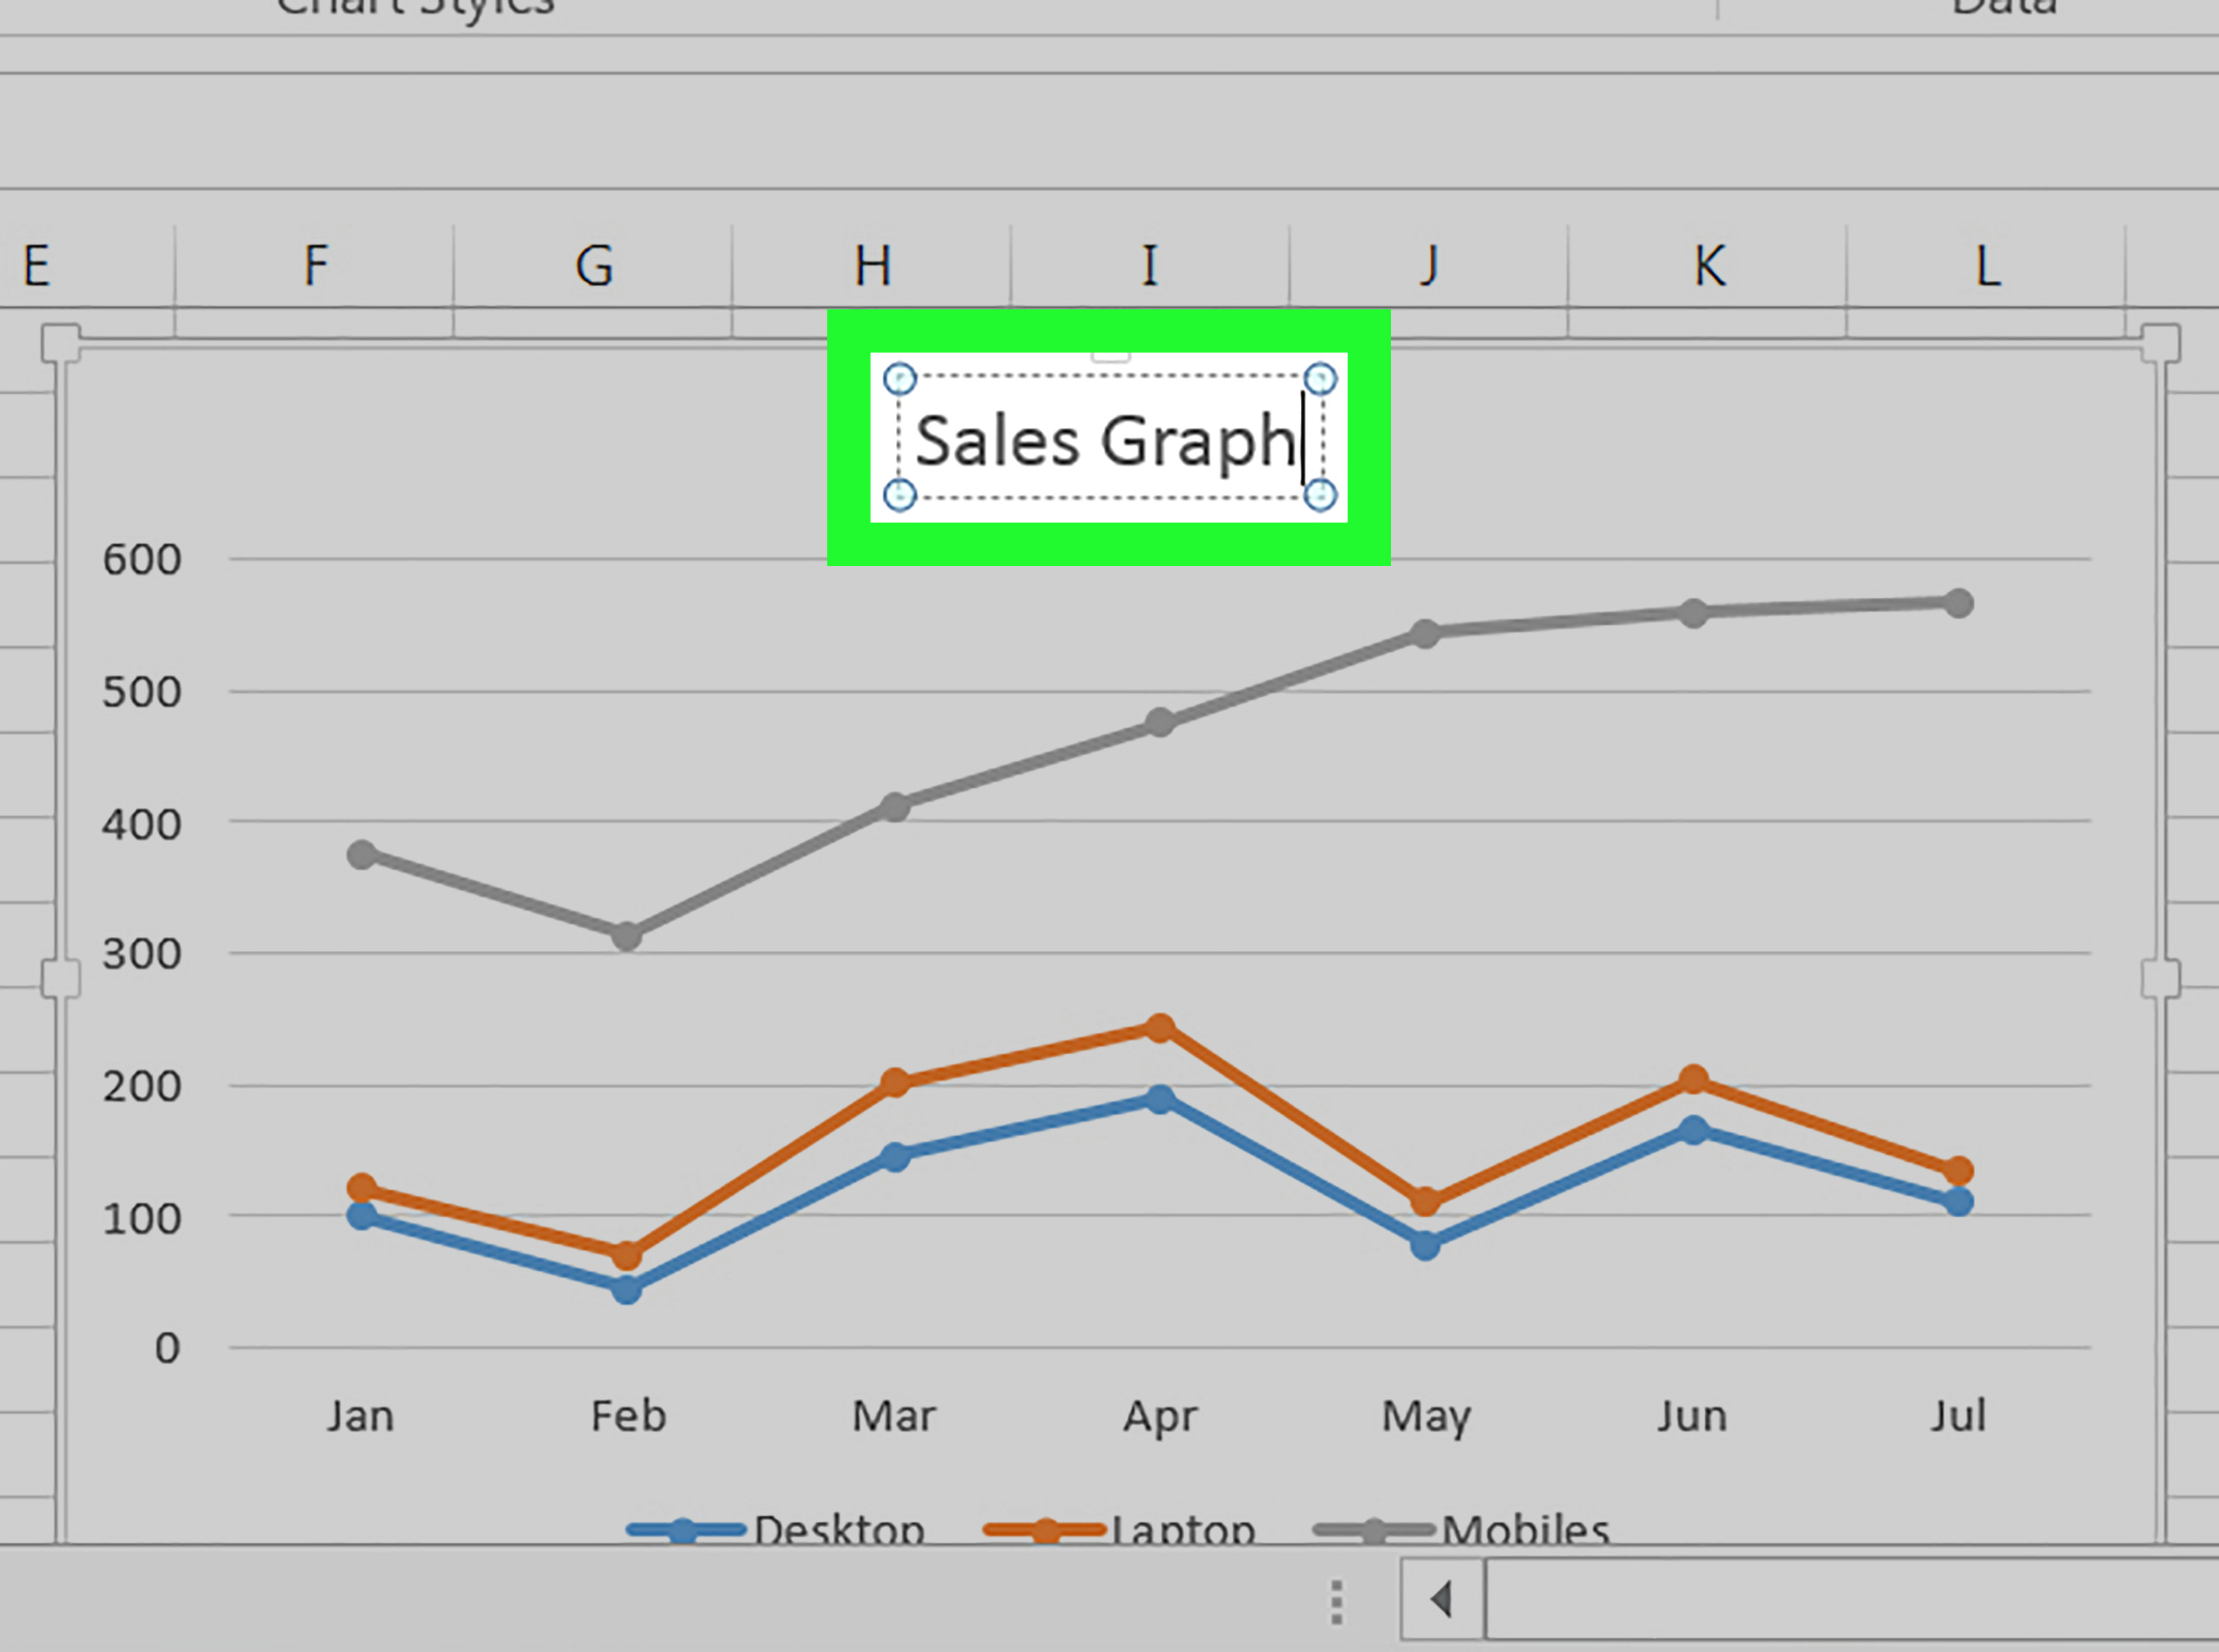 Drawing X Y Graph with Excel 2 Easy Ways to Make A Line Graph In Microsoft Excel